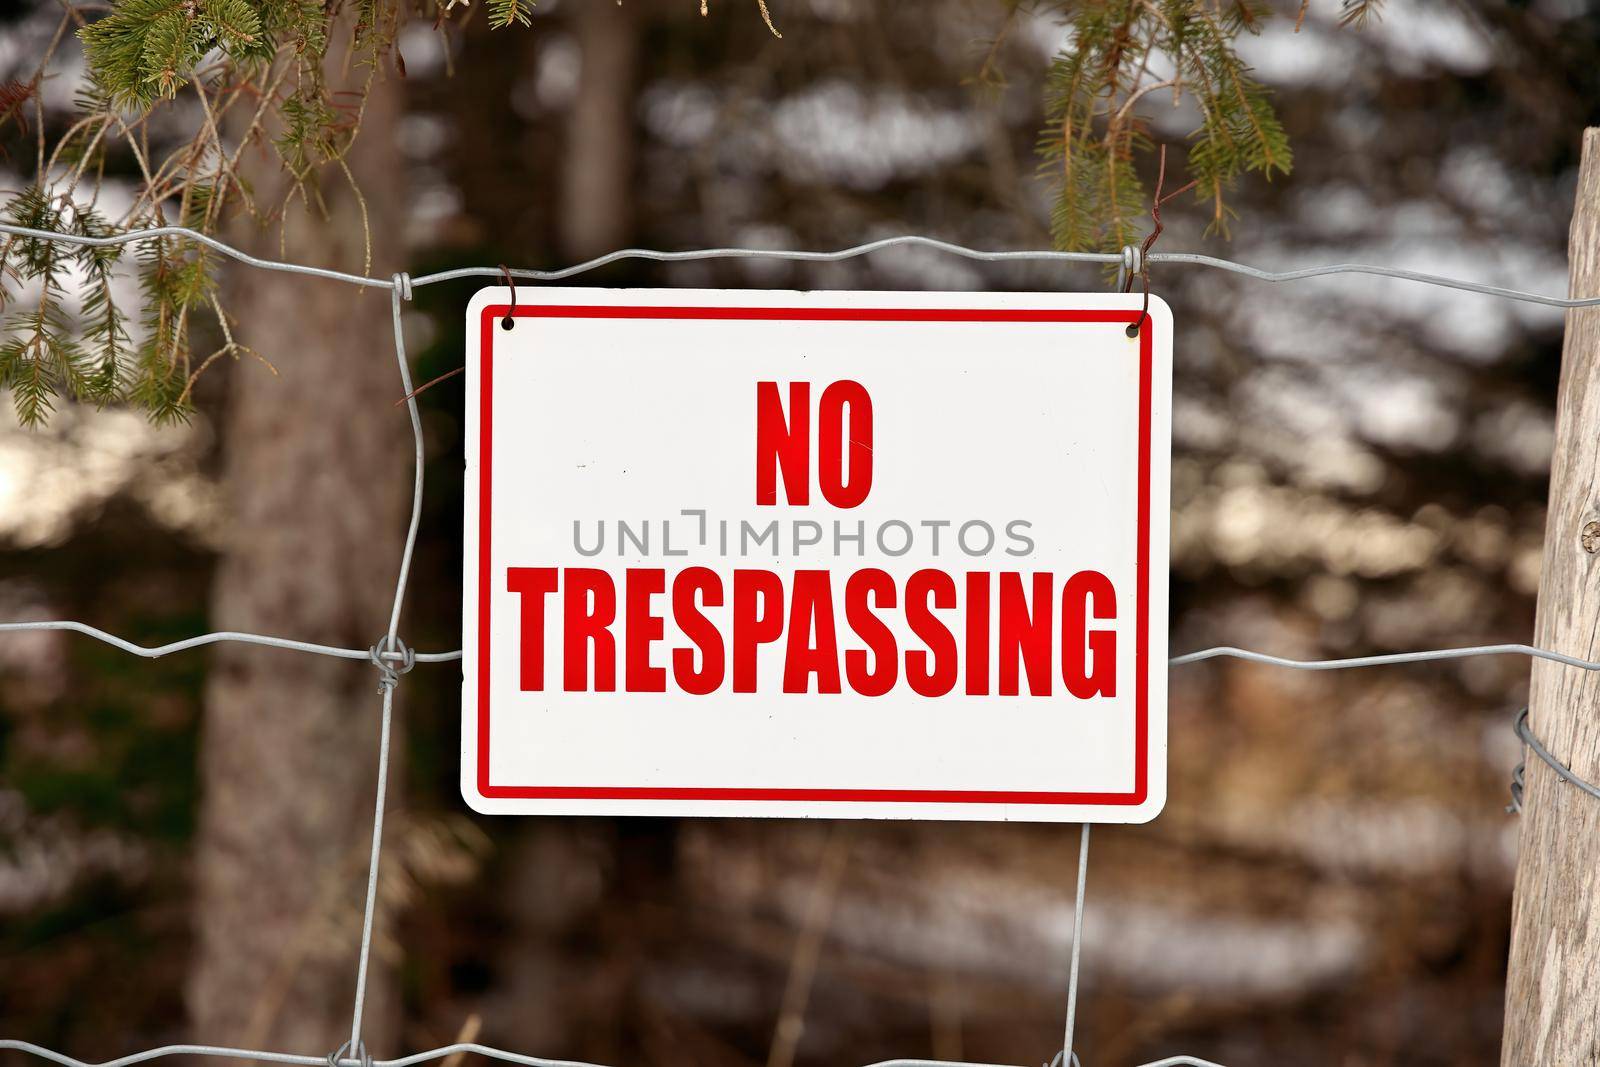 No Trespassing Sign Posted on a Wire Fence in a Rural Setting by markvandam